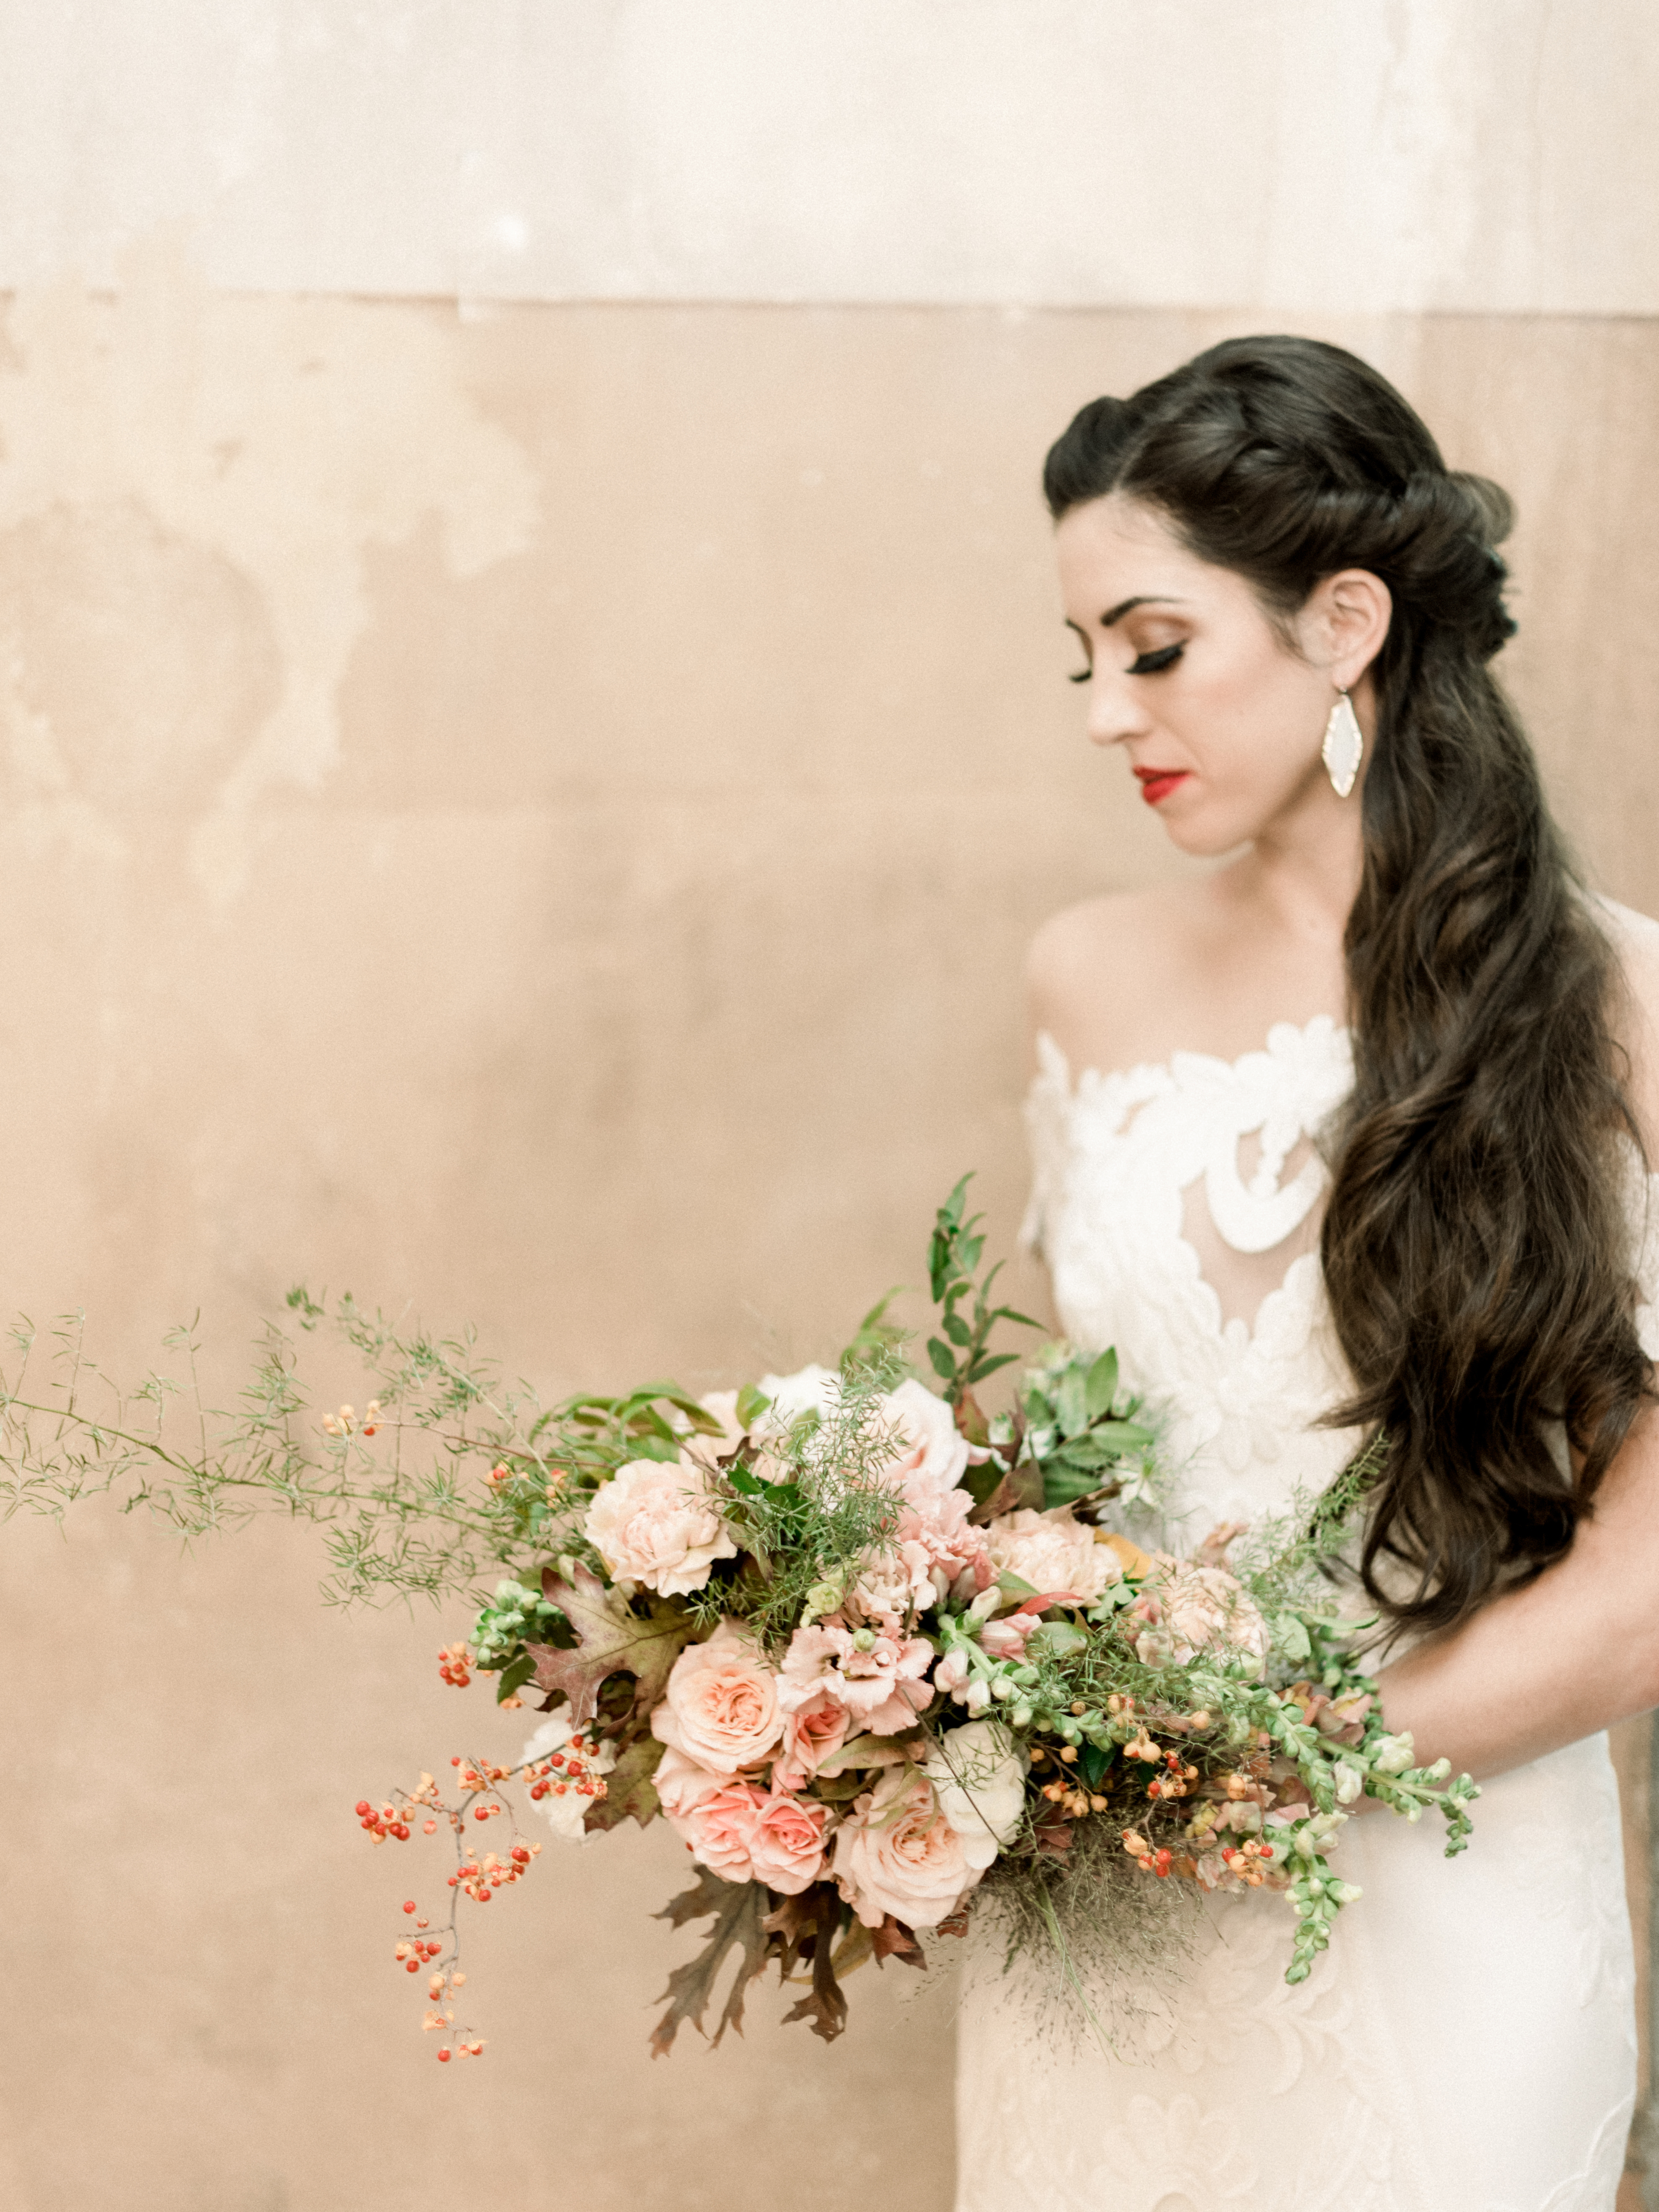 Romantic industrial wedding styled shoot with a feminine fall look designed by Alexa Kay Events and captured by Xsperience Photography. For more romantic wedding ideas visit alexakayevents.com!